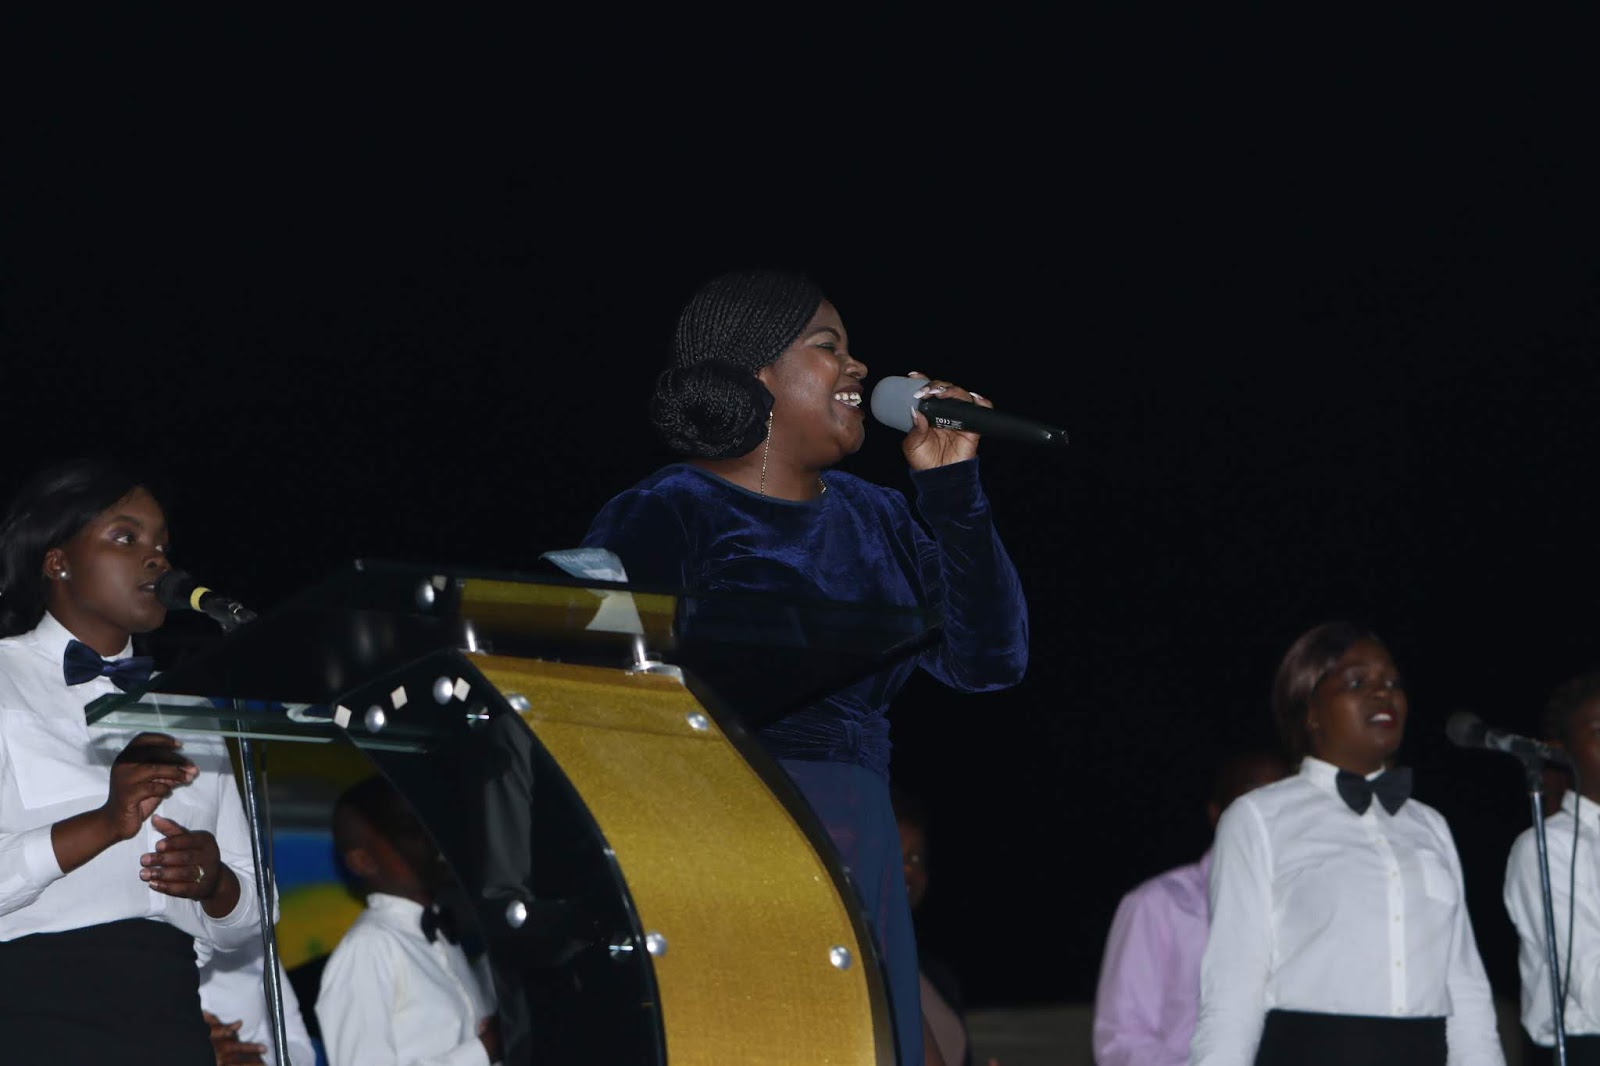 Gallery Of Pictures: Worship with Pastor Tasha At Tiyambuke Deliverance Night (Part 2)